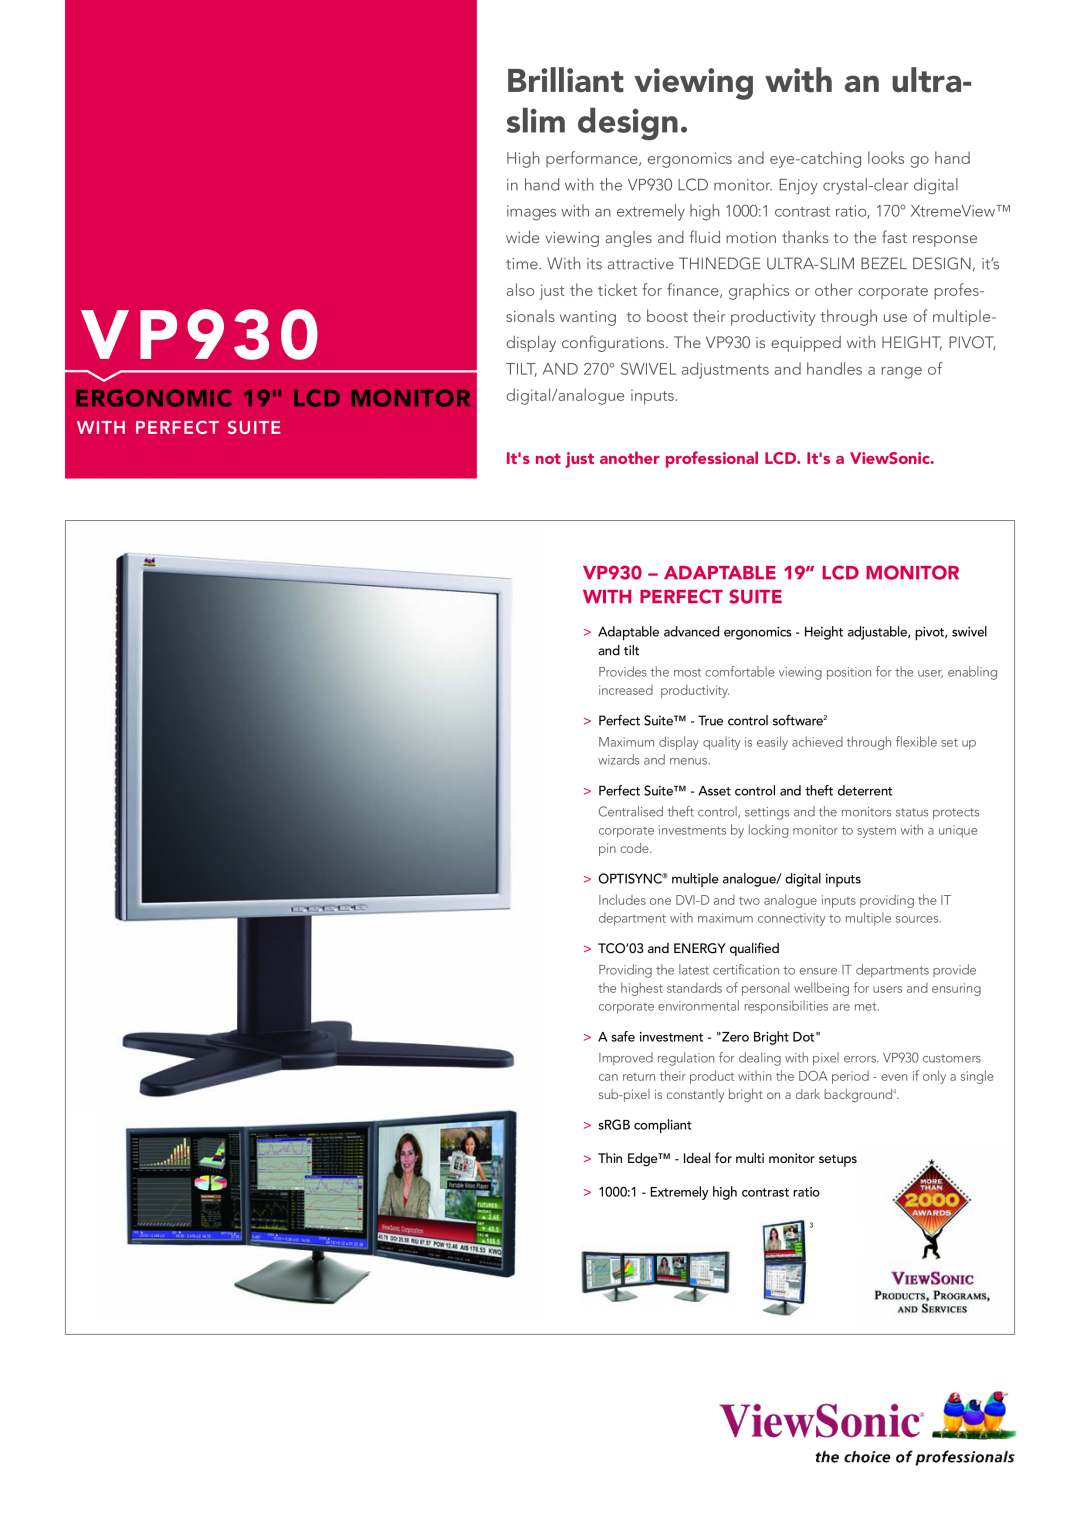 ViewSonic VP930 manual ERGONOMIC 19 LCD MONITOR, V P, Brilliant viewing with an ultra- slim design, With Perfect Suite 